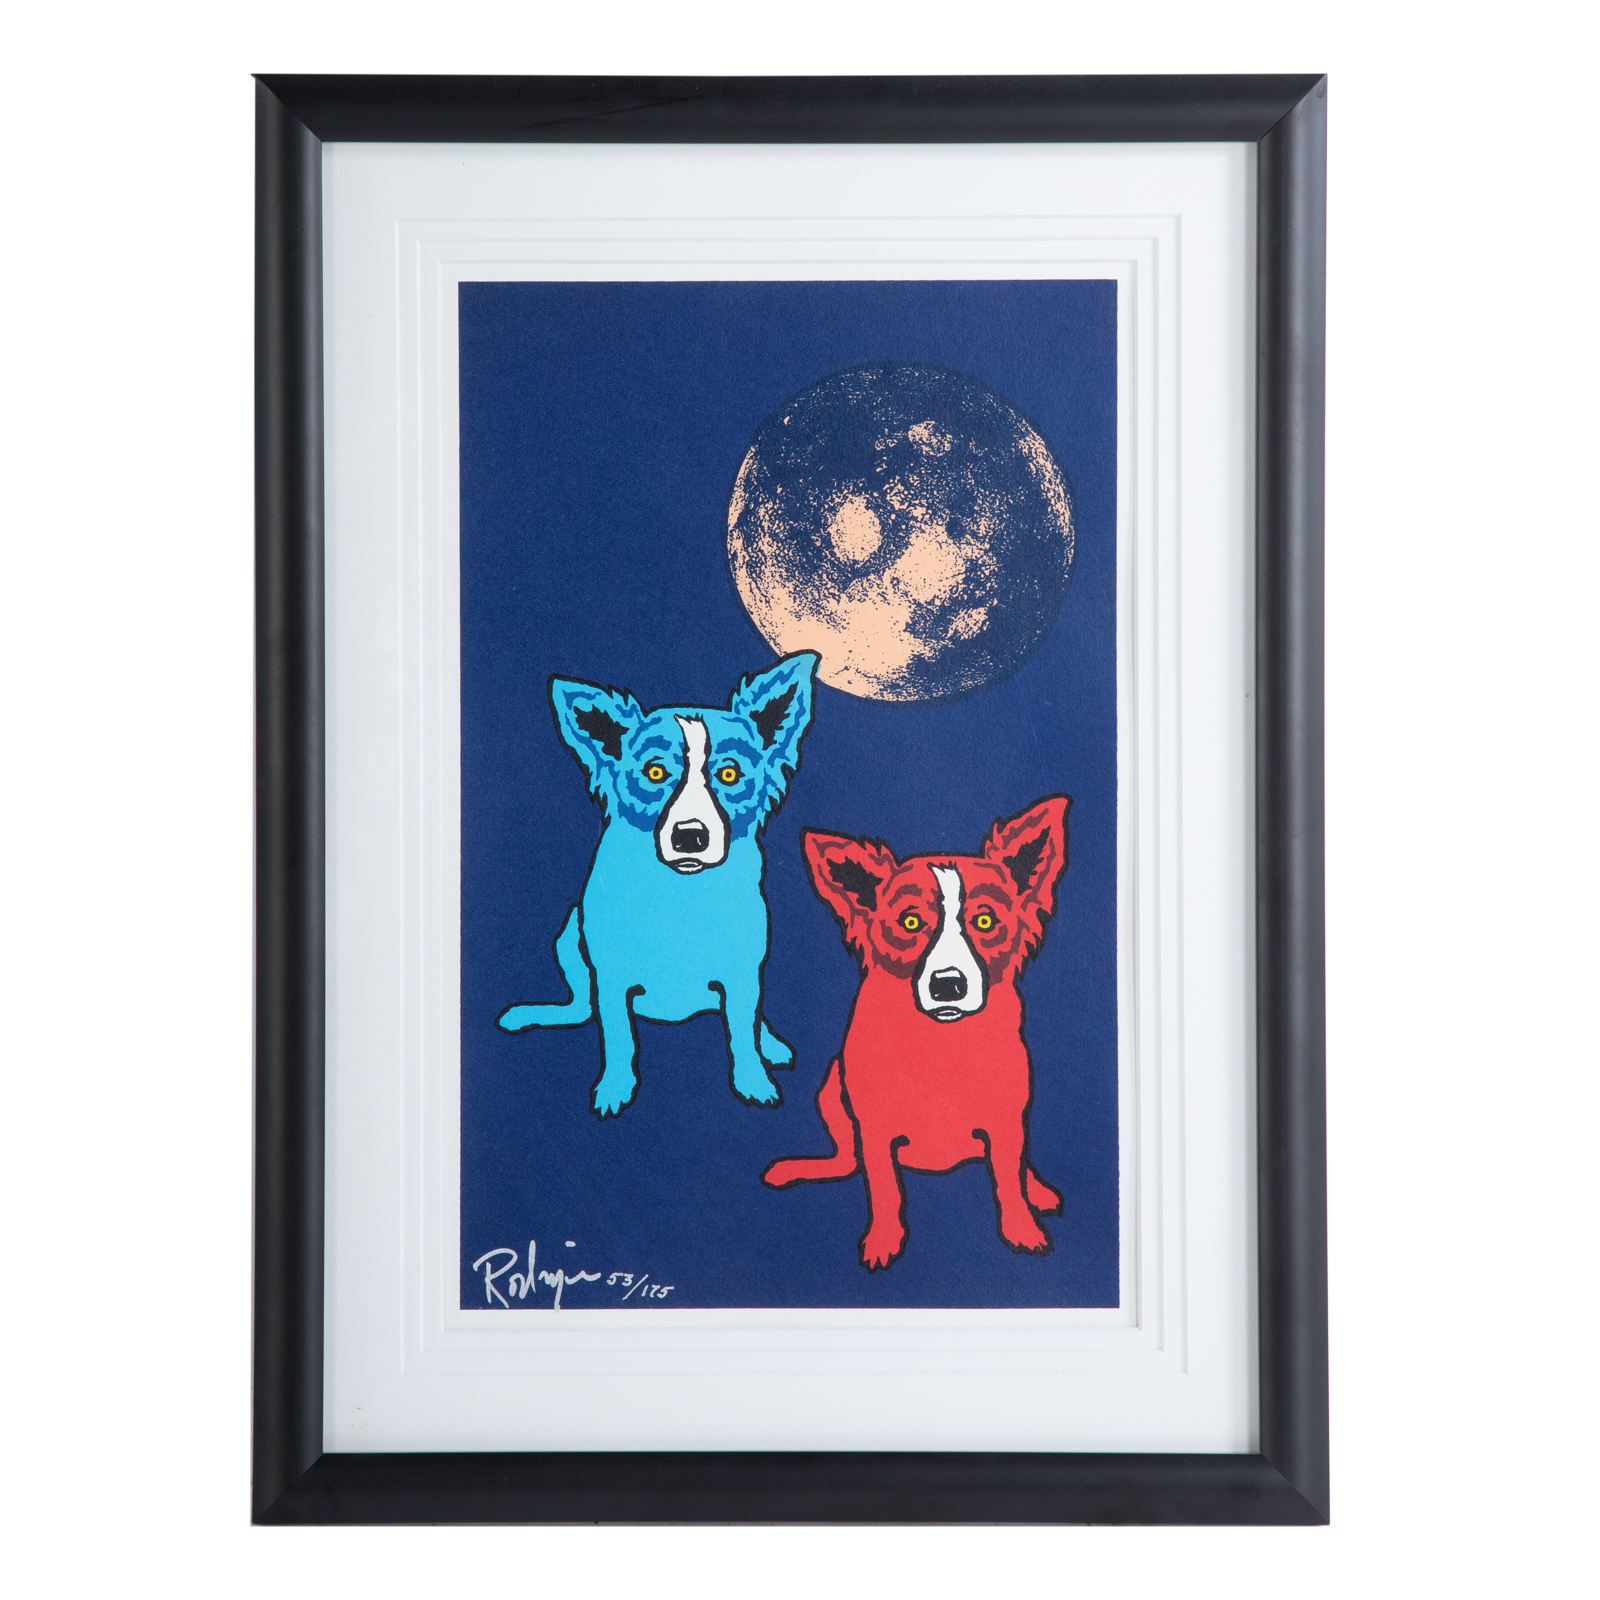 GEORGE RODRIGUE."COSMO'S MOON,"